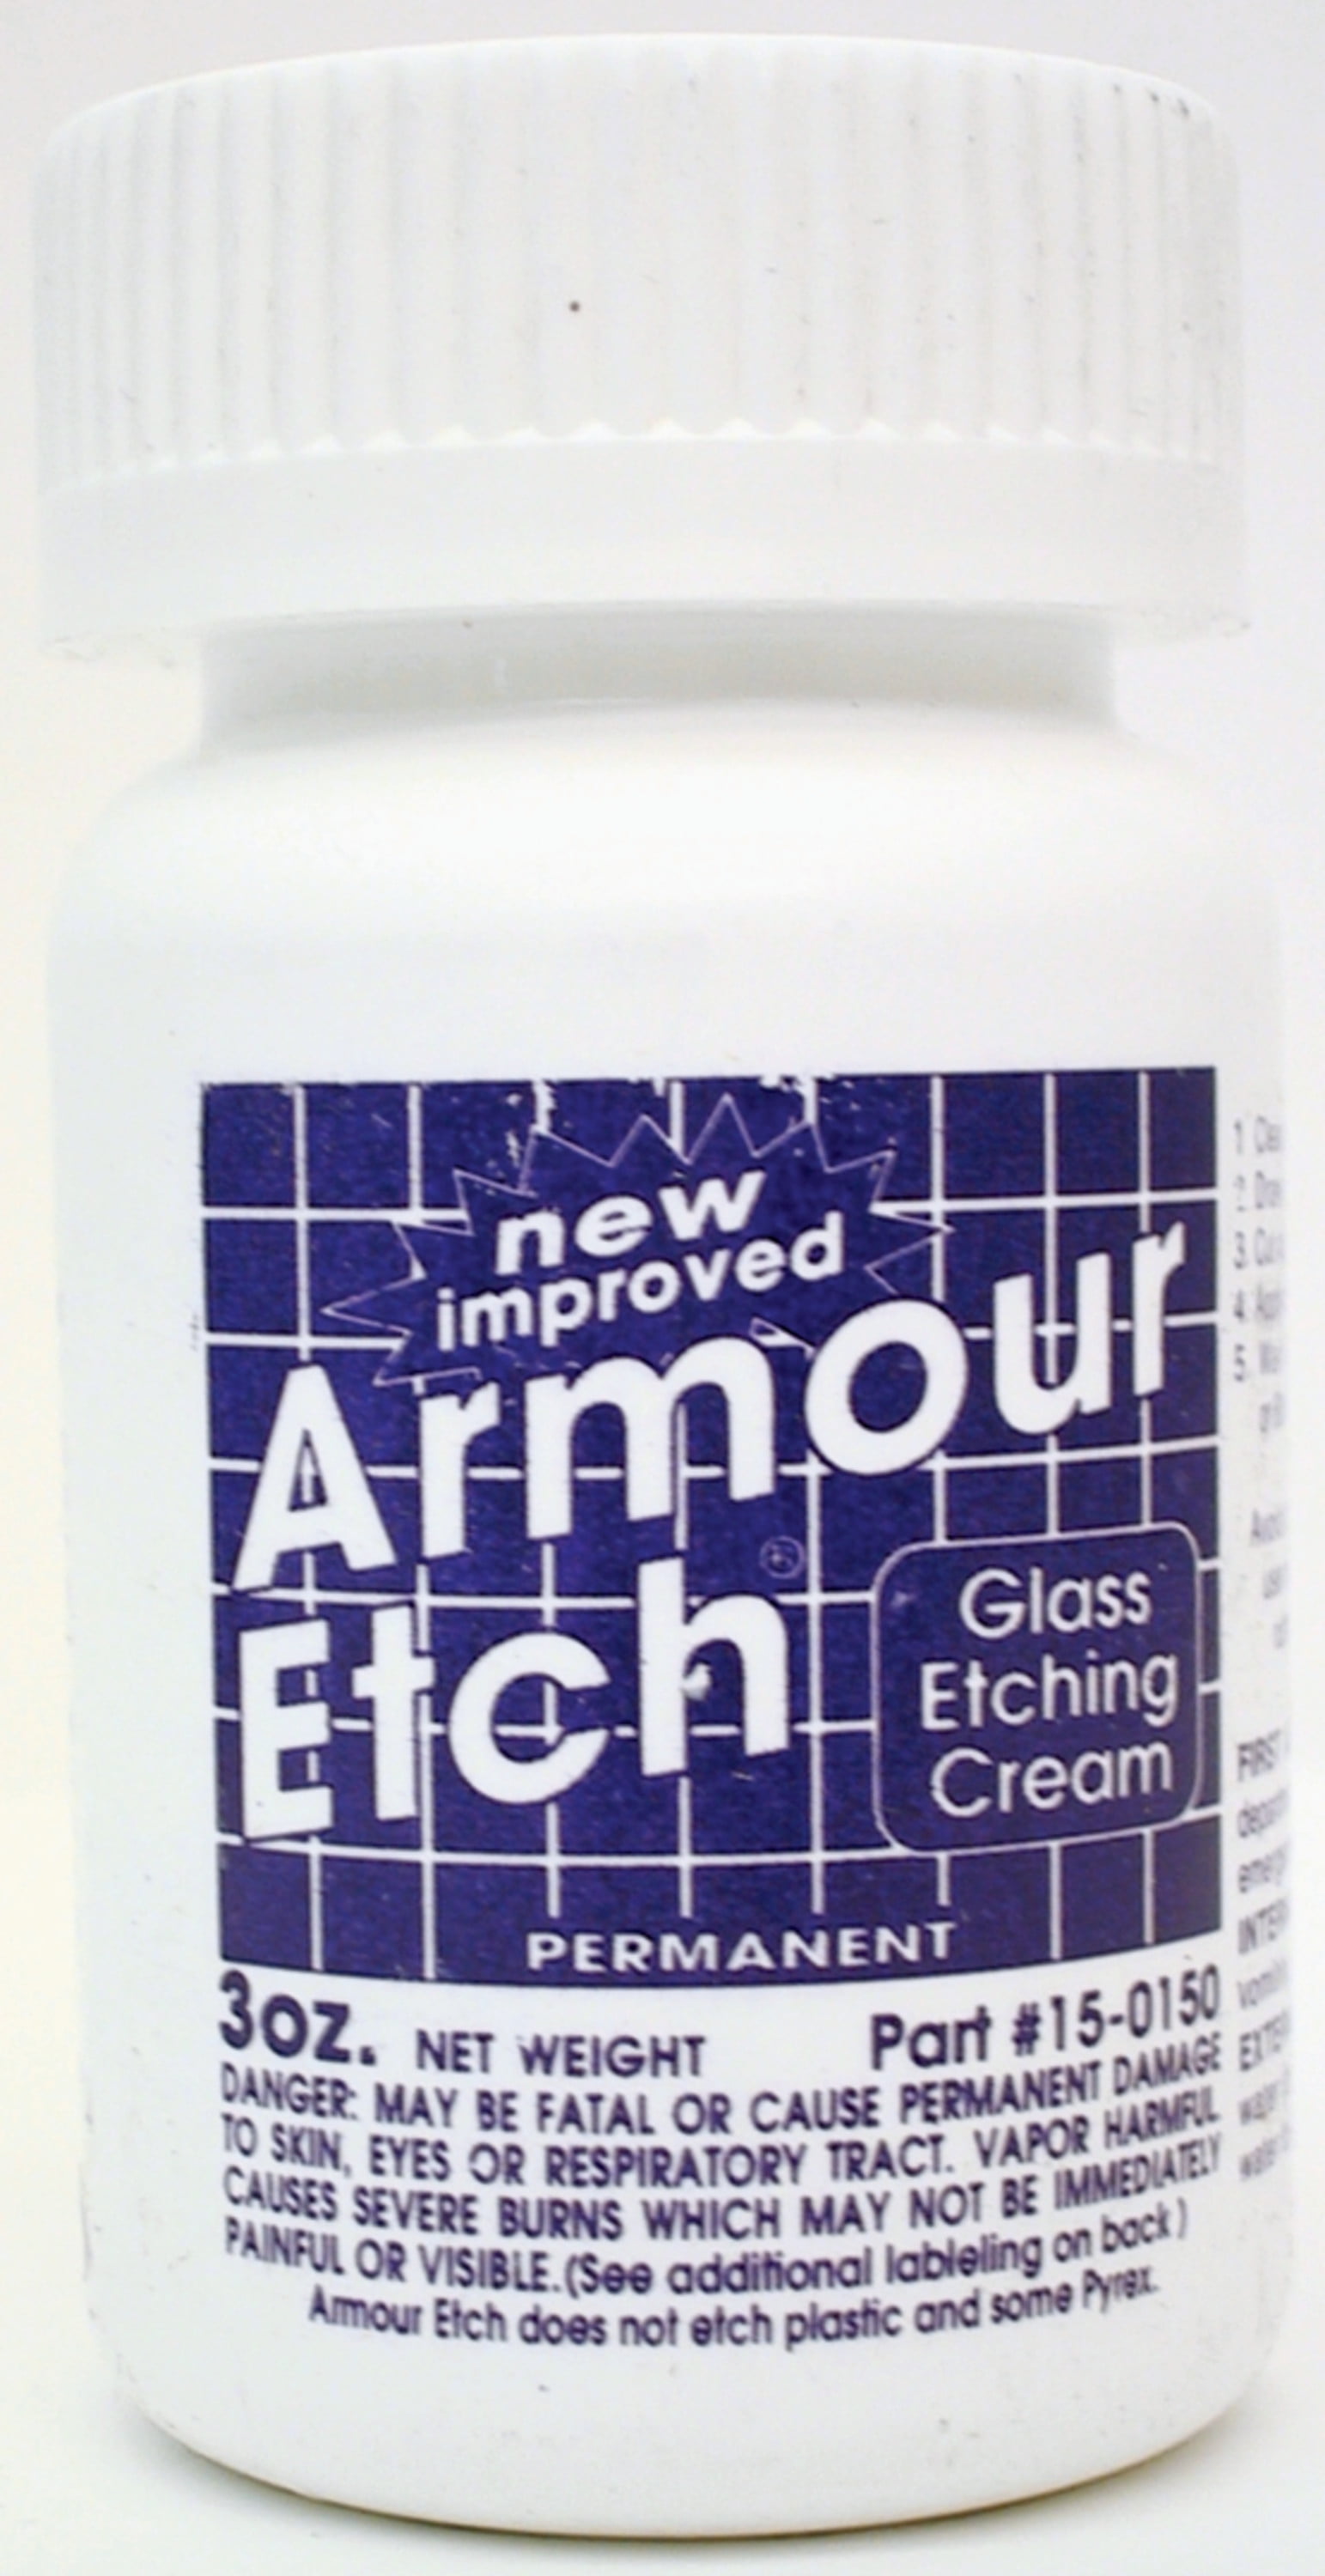 Armor Etch can be a cheap fix for your scratched eyeglasses